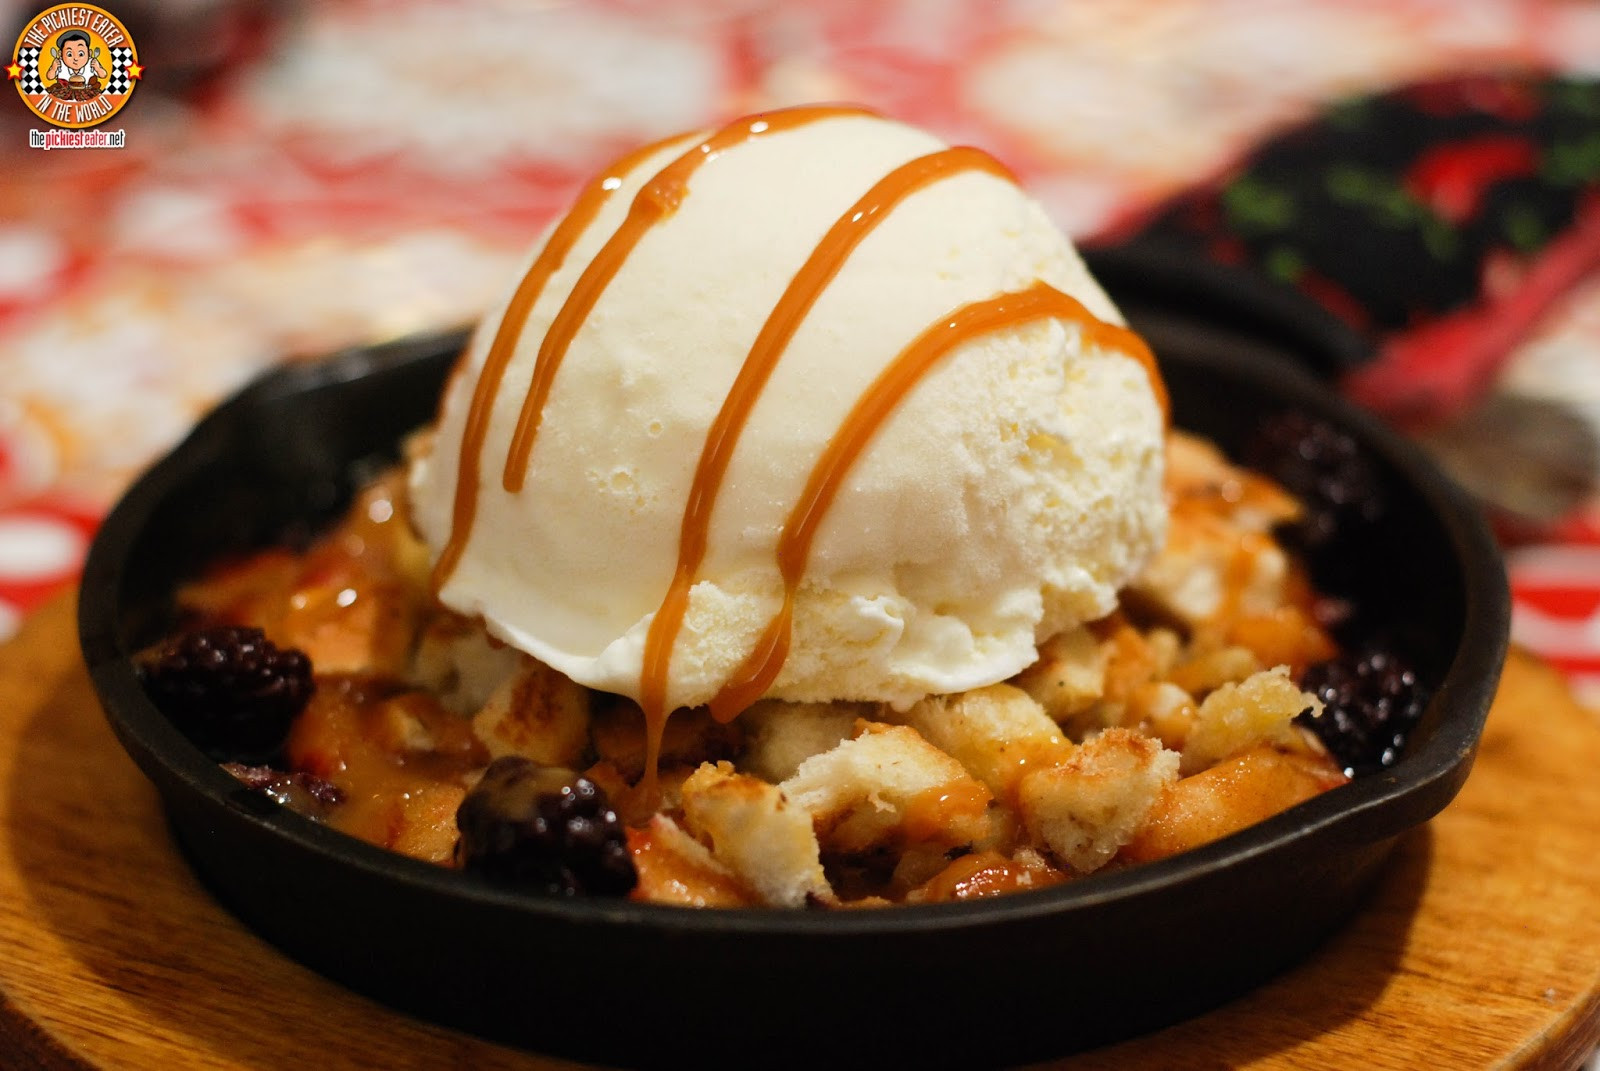 Chilis Menu Desserts
 THE PICKIEST EATER IN THE WORLD CHILI S NEW SWEET SMOKY